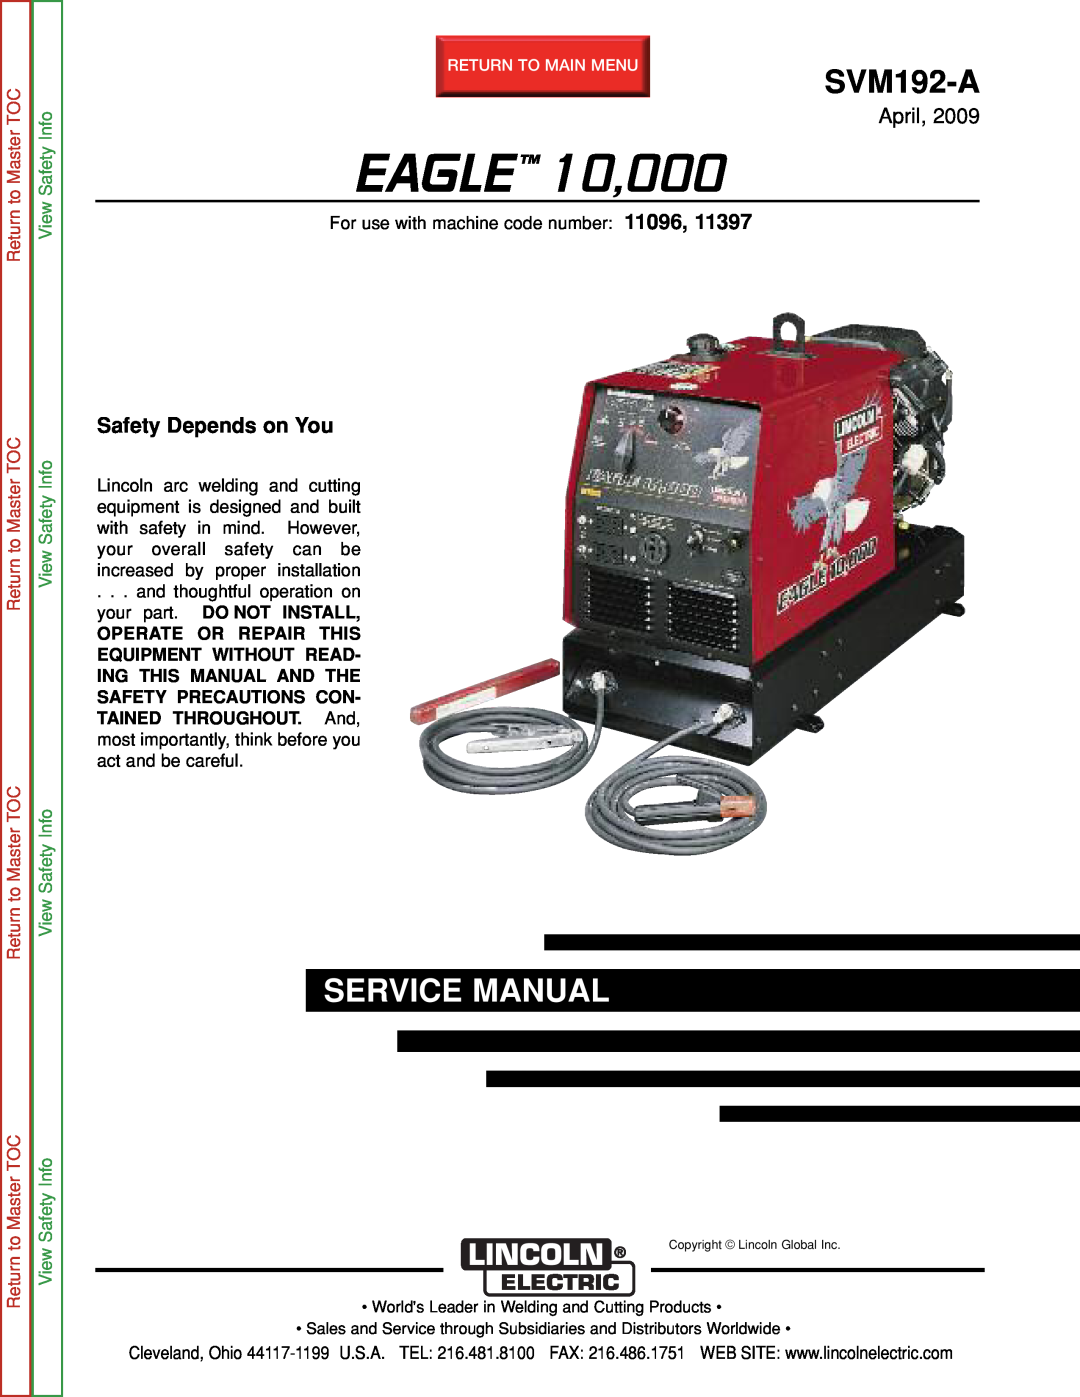 Lincoln Electric SVM192-A service manual April, Safety Depends on You, Return to Master TOC, EAGLE 10,000 